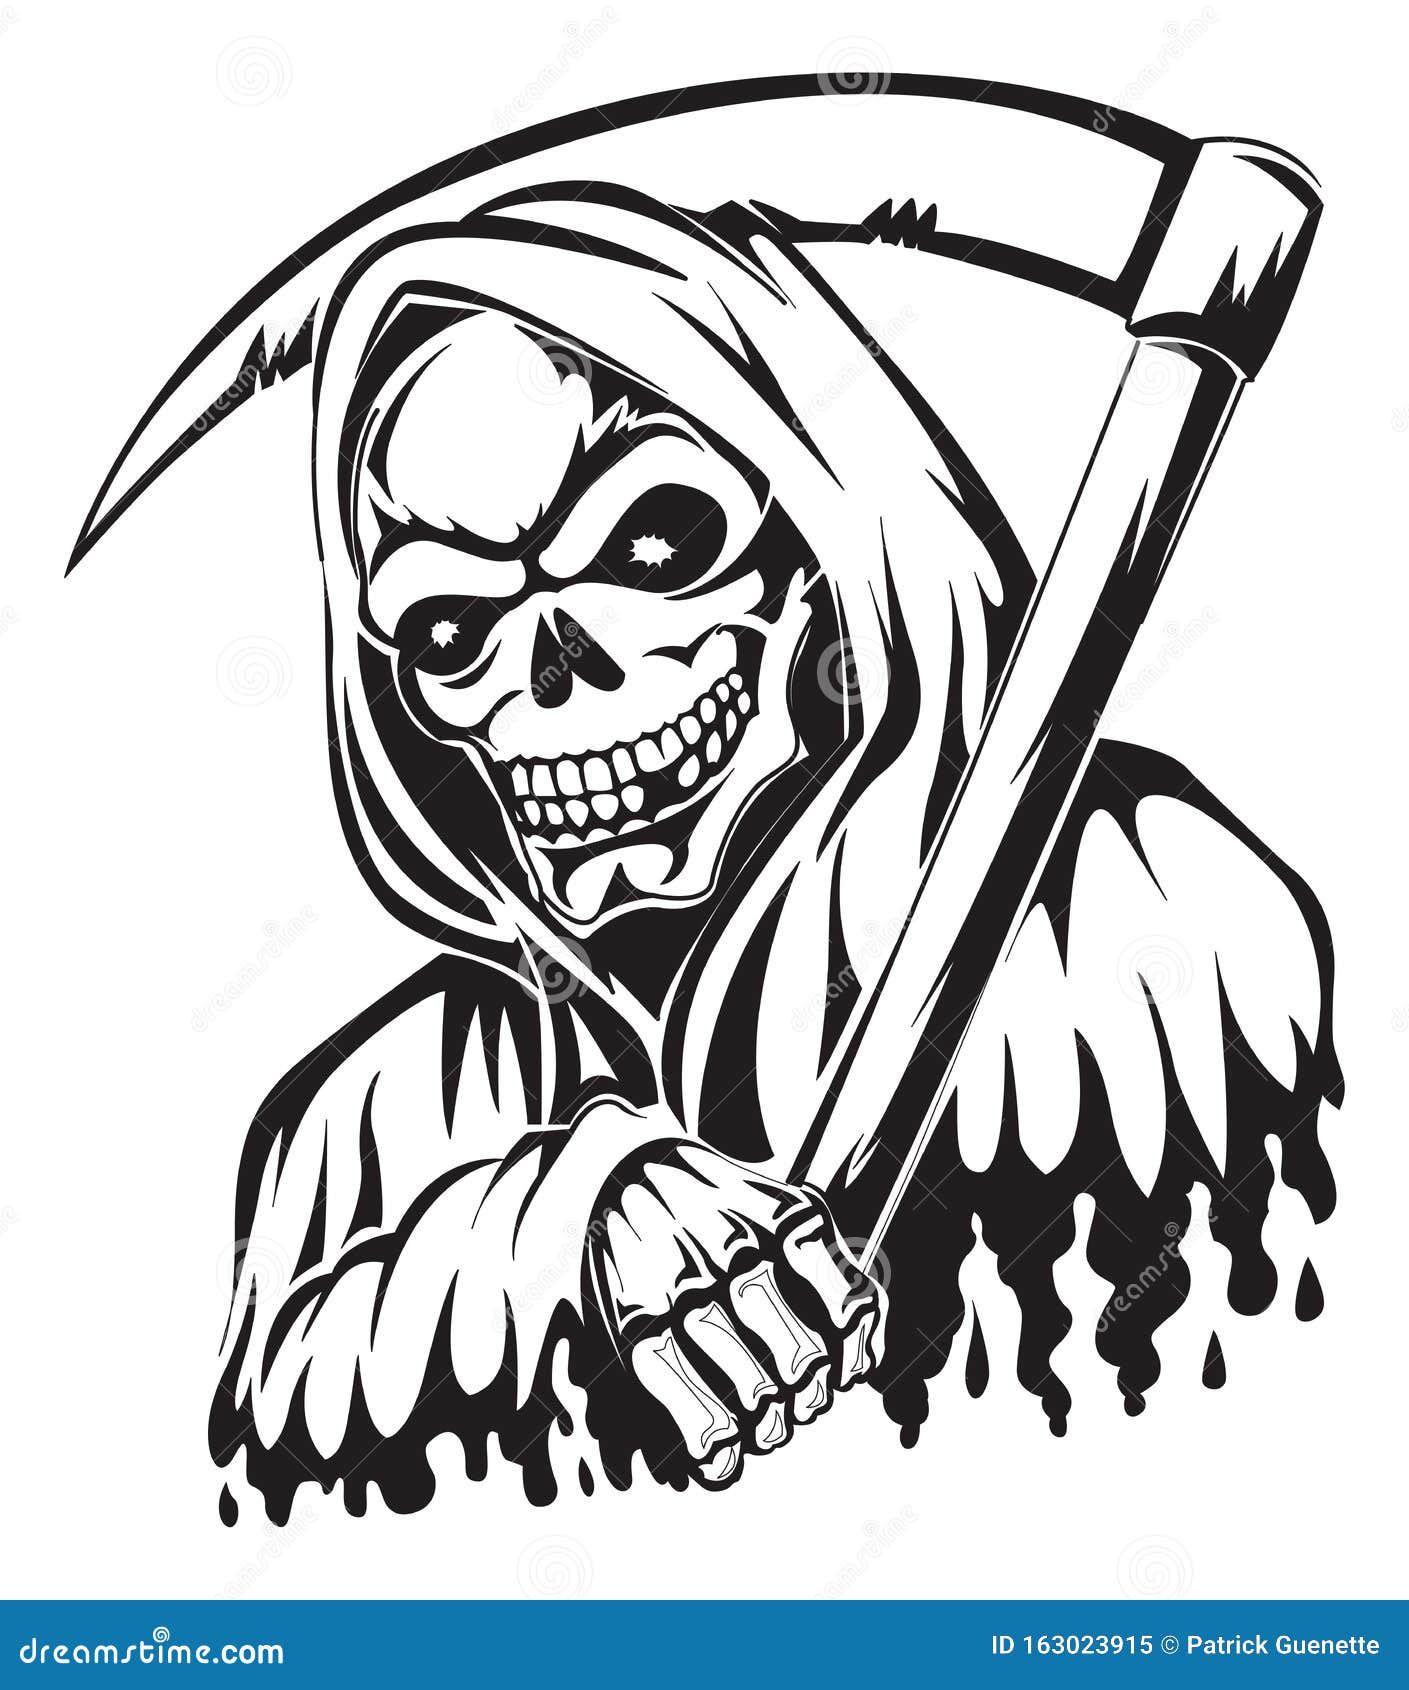 15 Grim Reaper Death Darkness Tattoo Designs – Symbolizing the  Inevitability of Death and the Concept of Mortality! - Psycho Tats